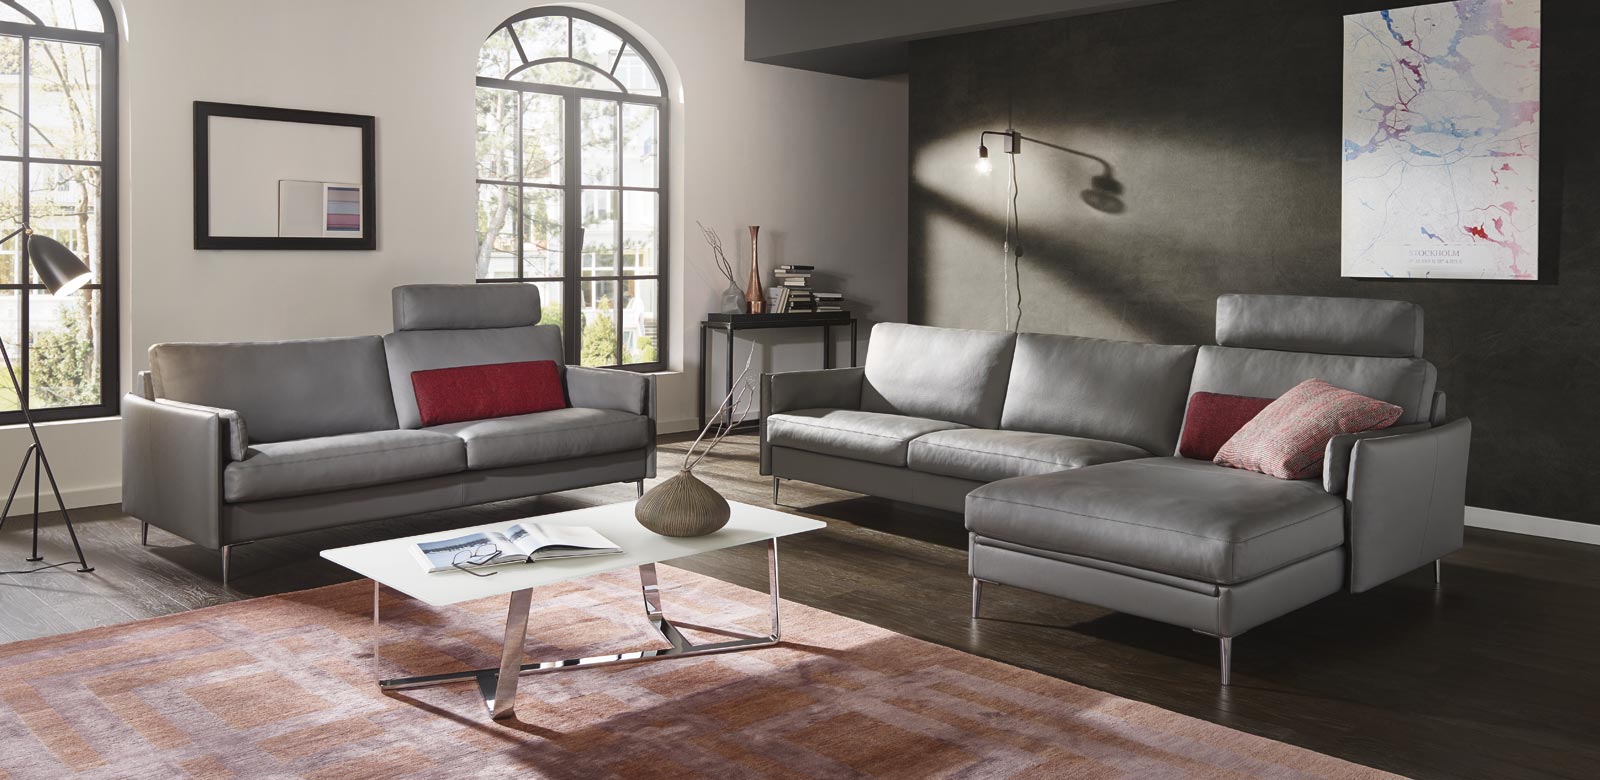 CL820 2-seater and longchair combination, with headrests, in grey leather and red cushions in a modern country house style